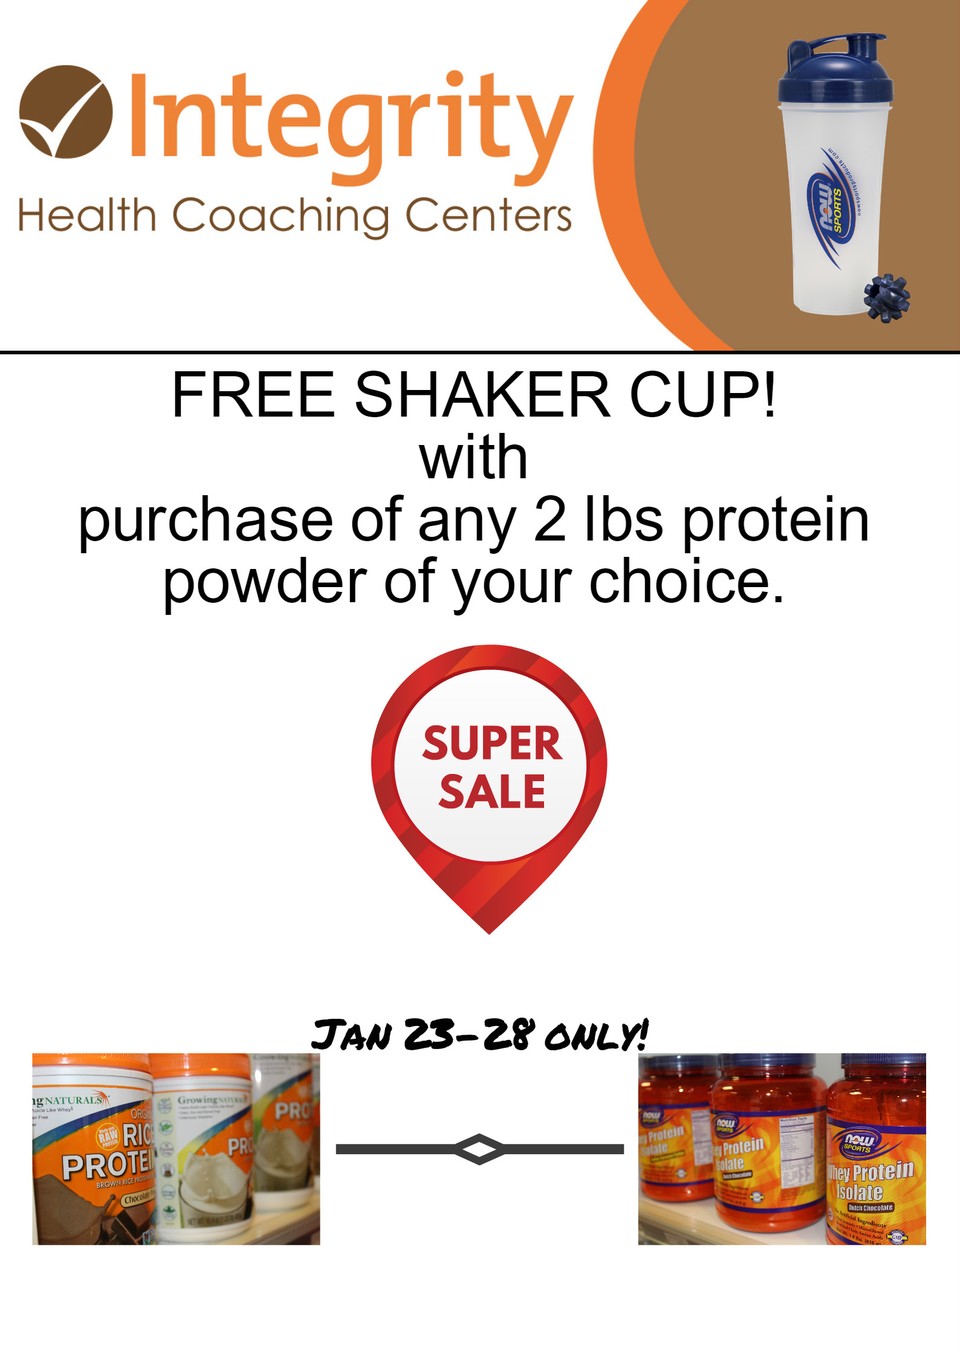 FREE shaker cup with purchase of a 2 pound protein power - $10 value